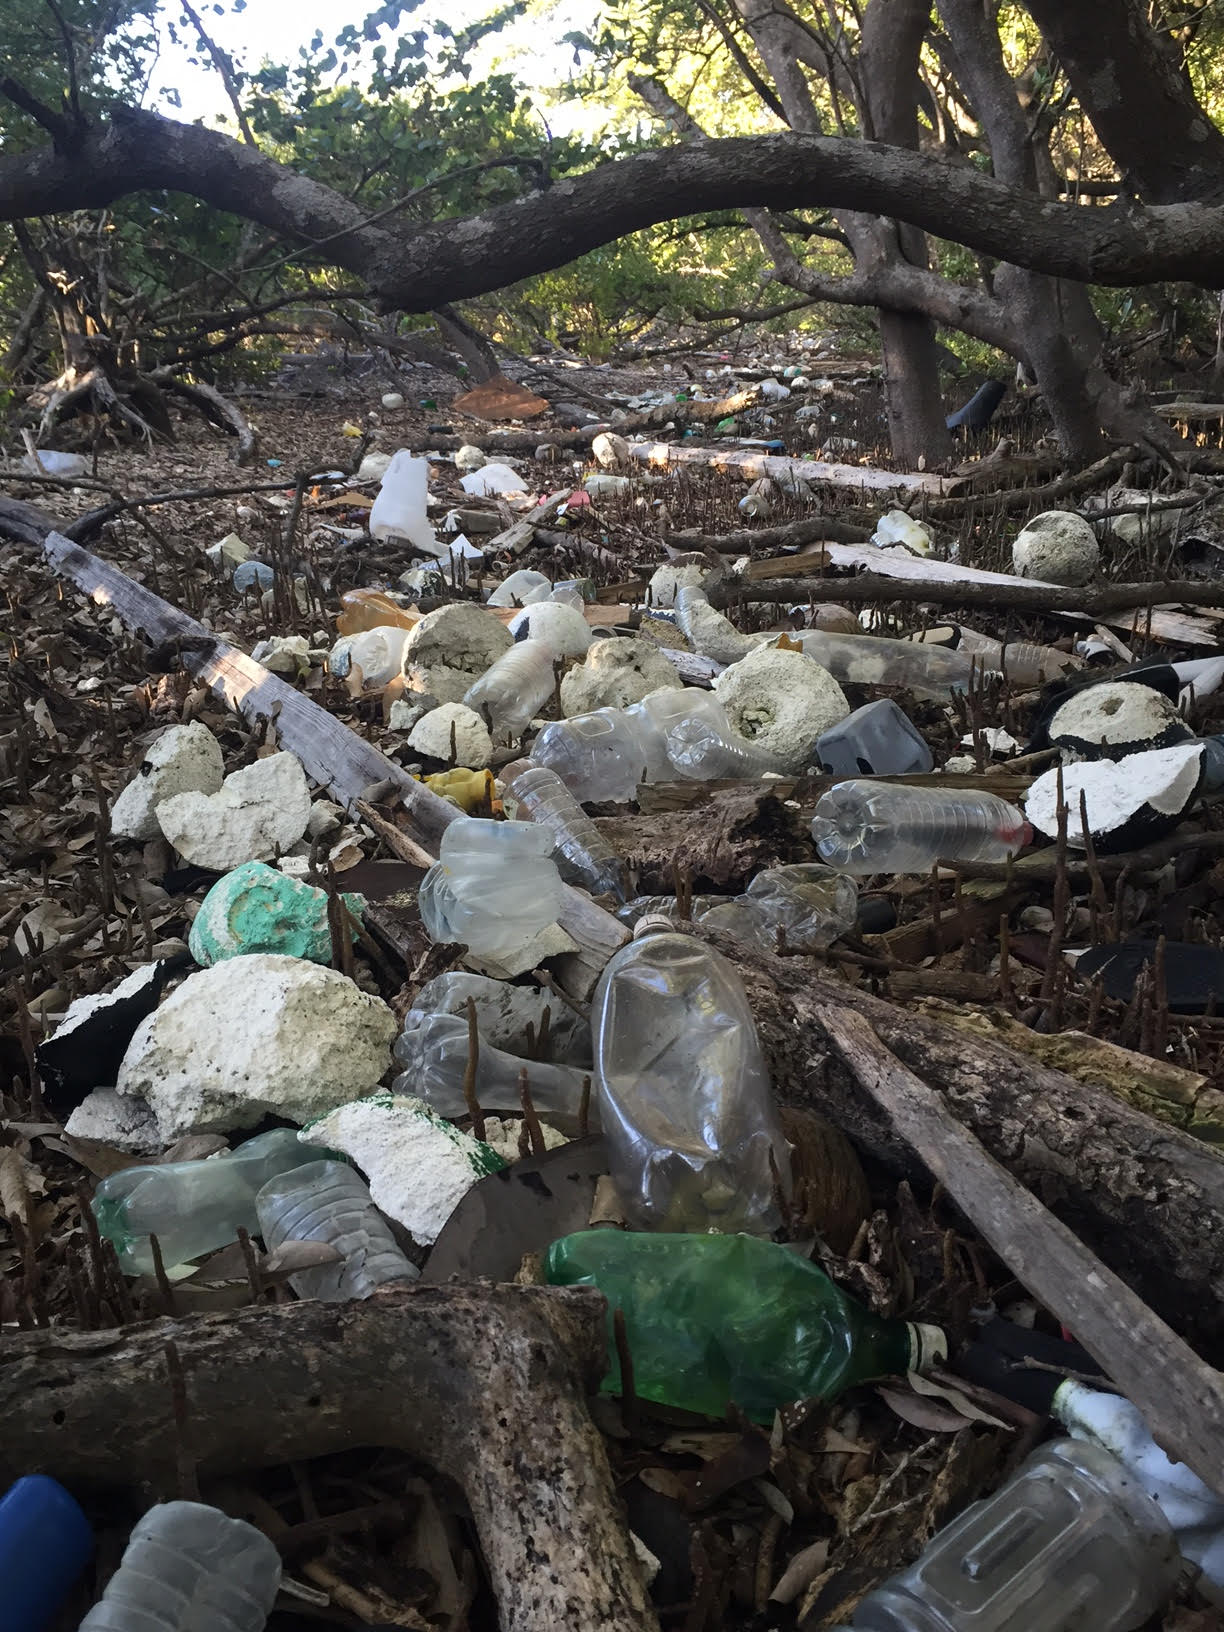 Plastic litter collects in the mangroves of the Florida Keys